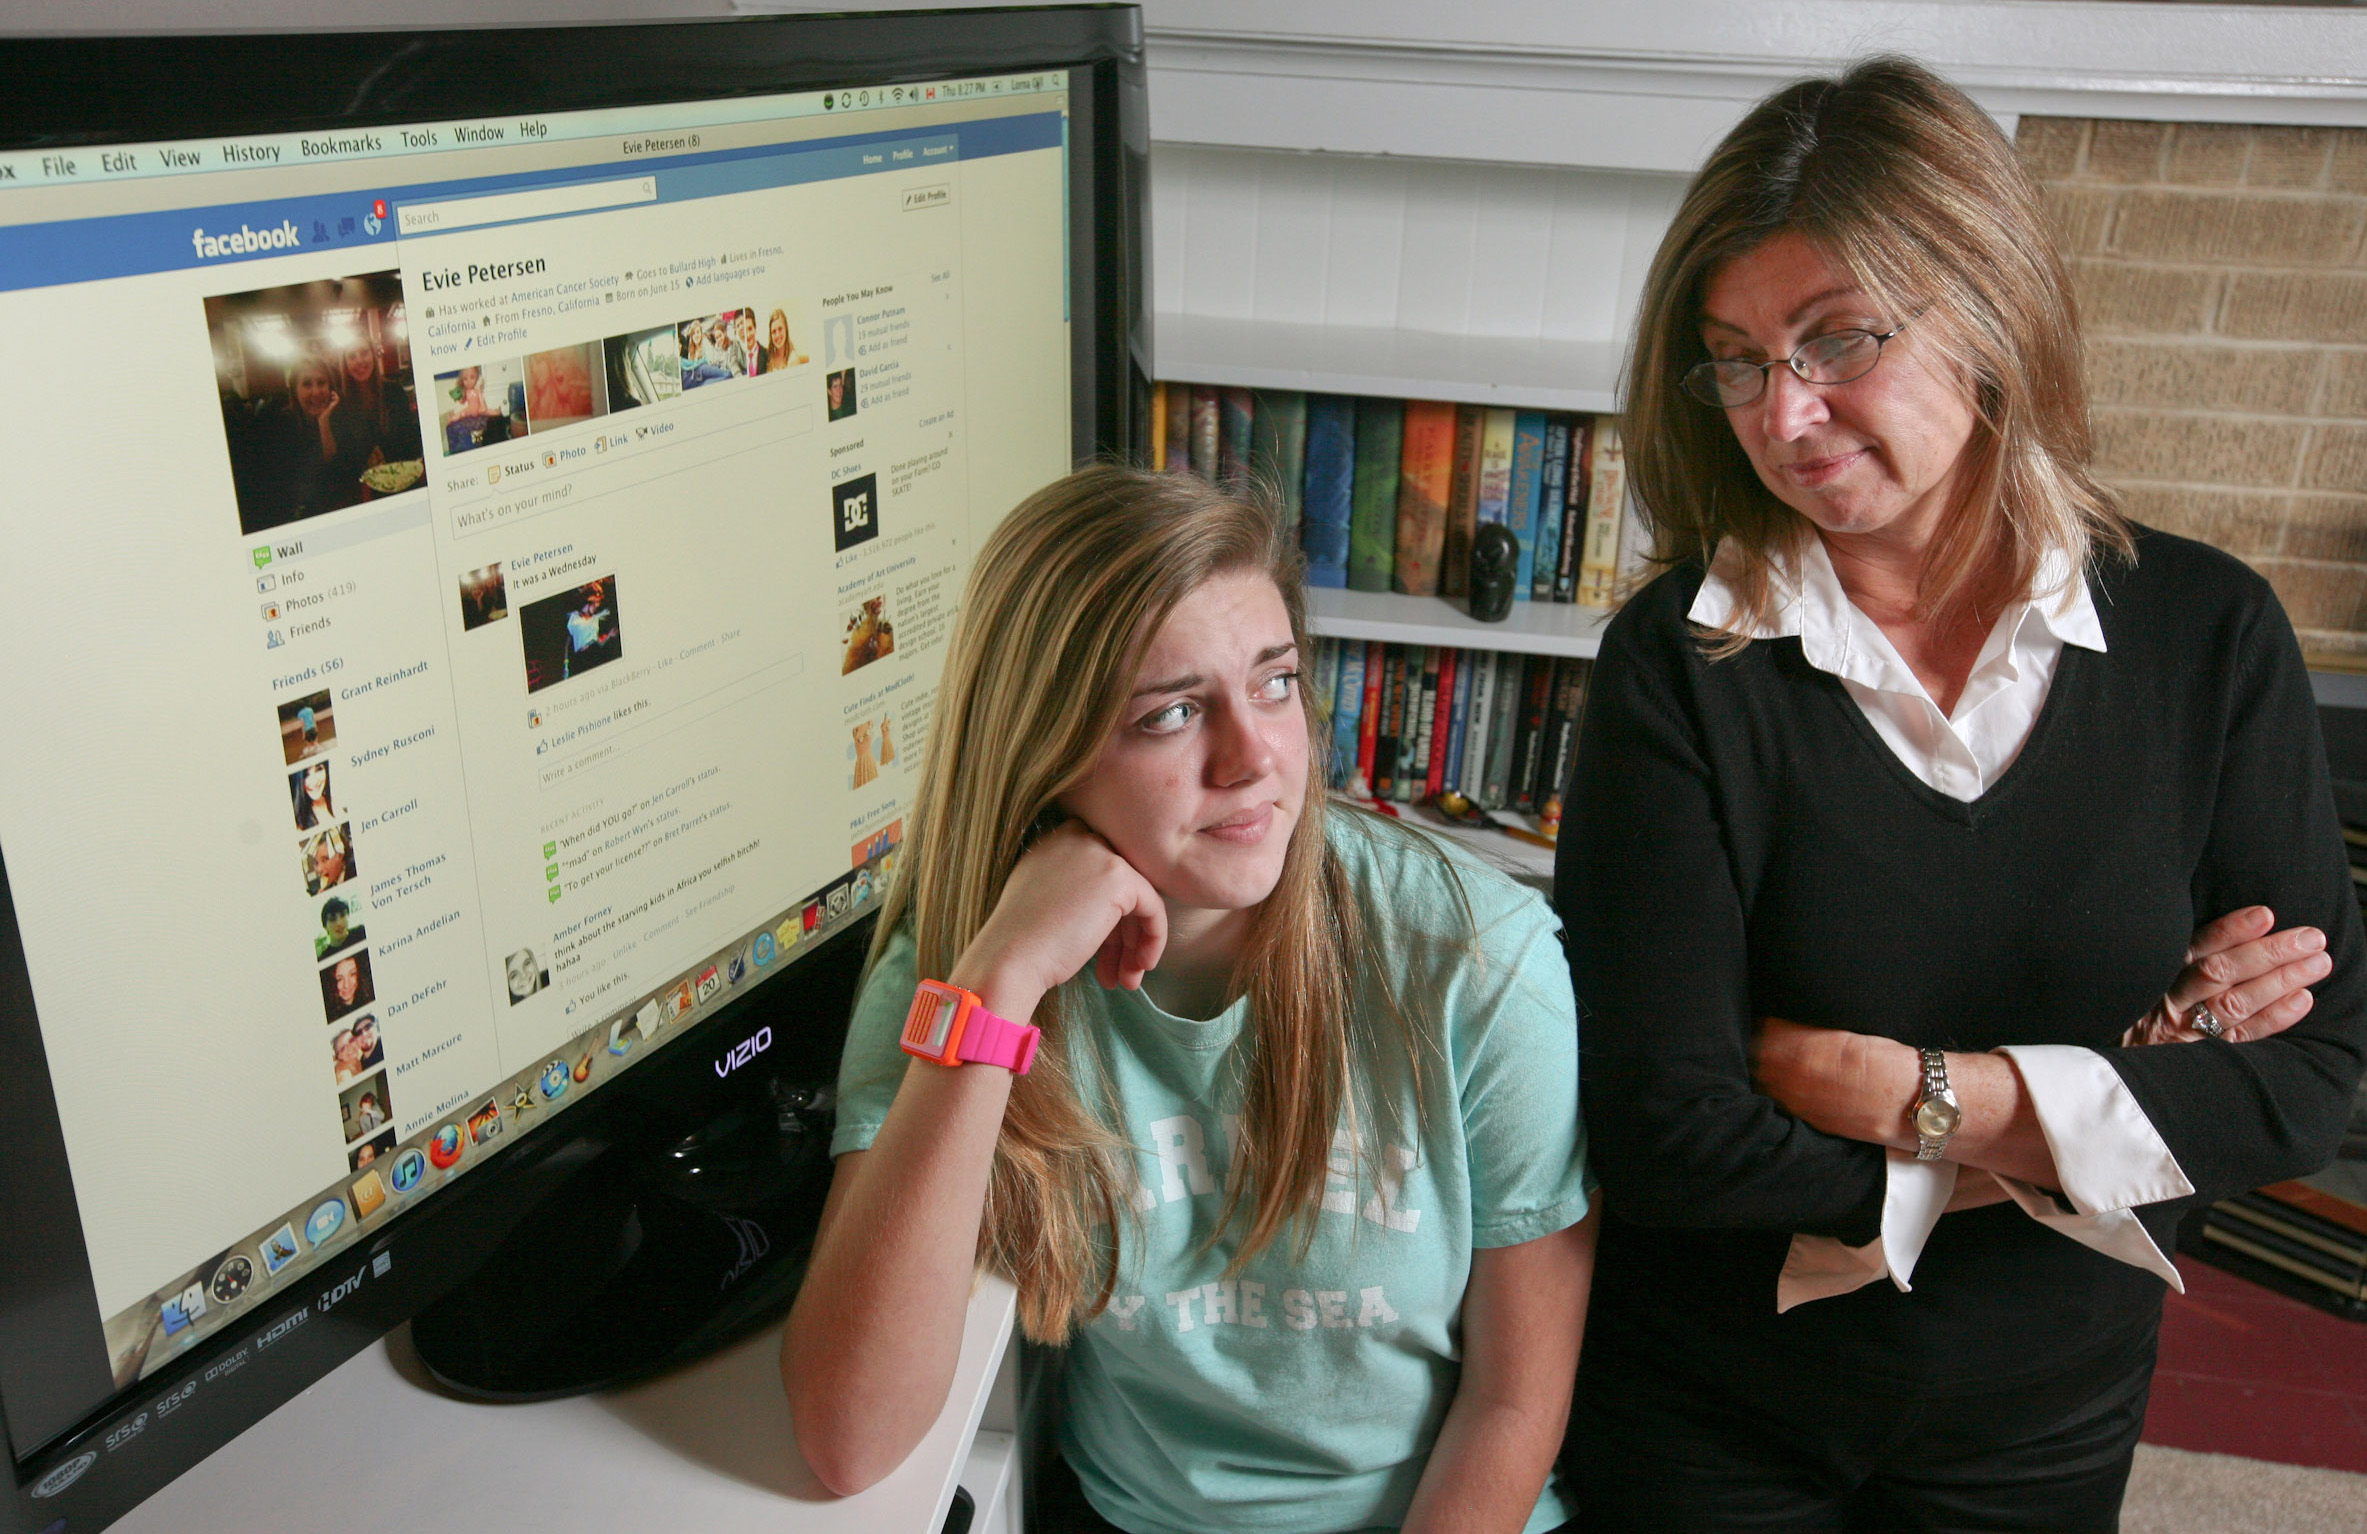 Evie Petersen, left, likes having friends on Facebook, but doesn't especially want her mother, Gretta Petersen, right, to be one of them. Evie has friended, unfriended, refriended and then unfriended her mom. (Craig Kohlruss/Fresno Bee/MCT)